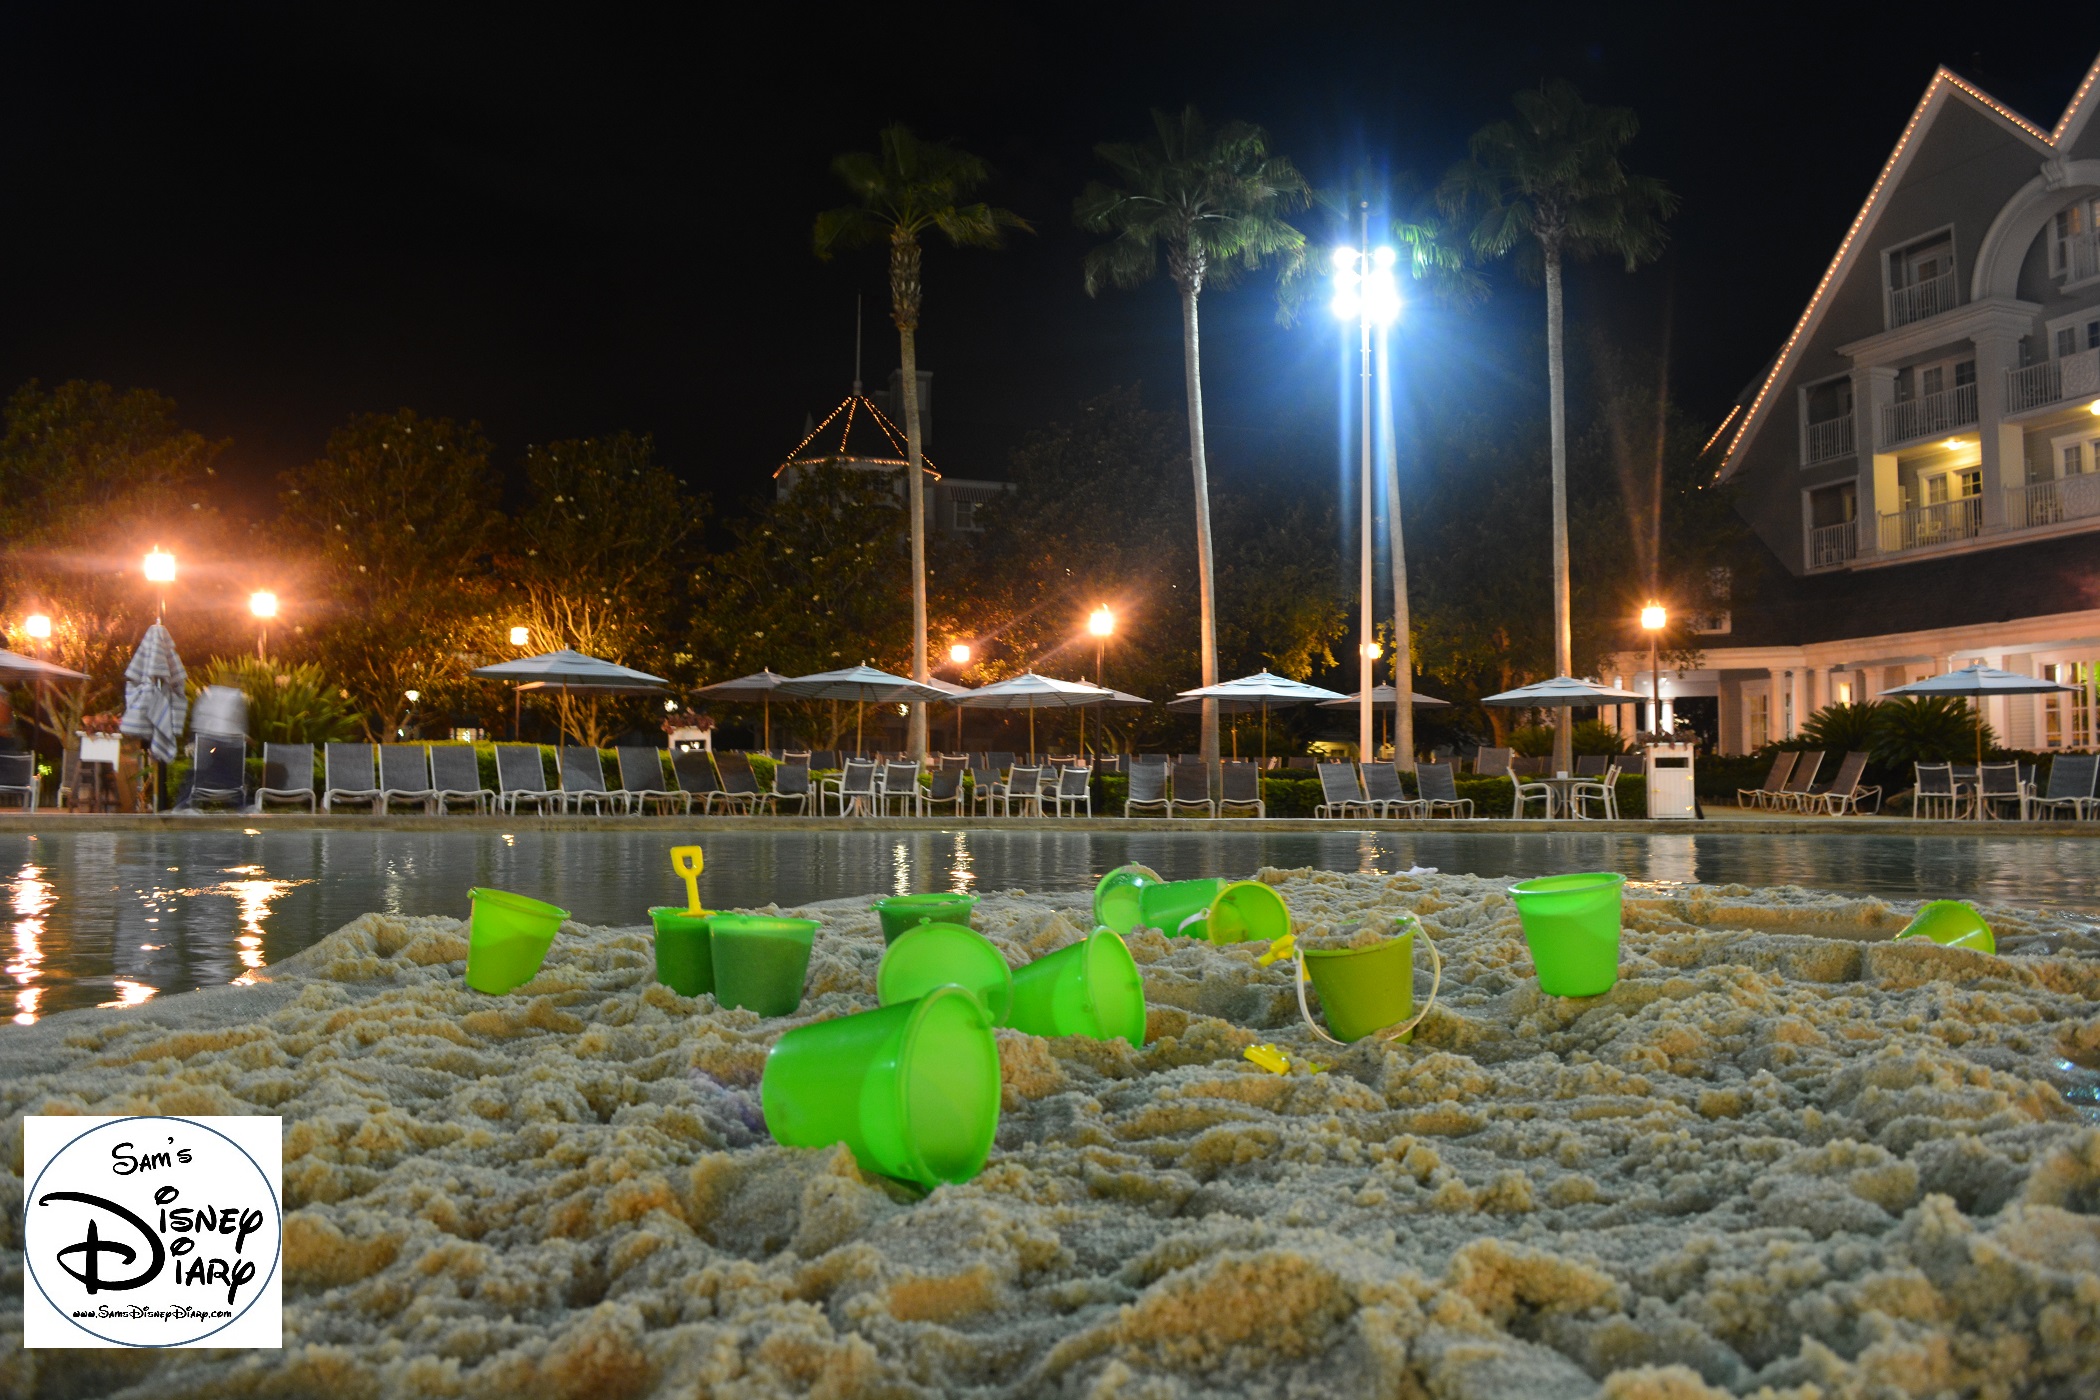 The sand bottom feature pool at stormalong bay. Kids Meals are served in the green buckets. Lots available for use.